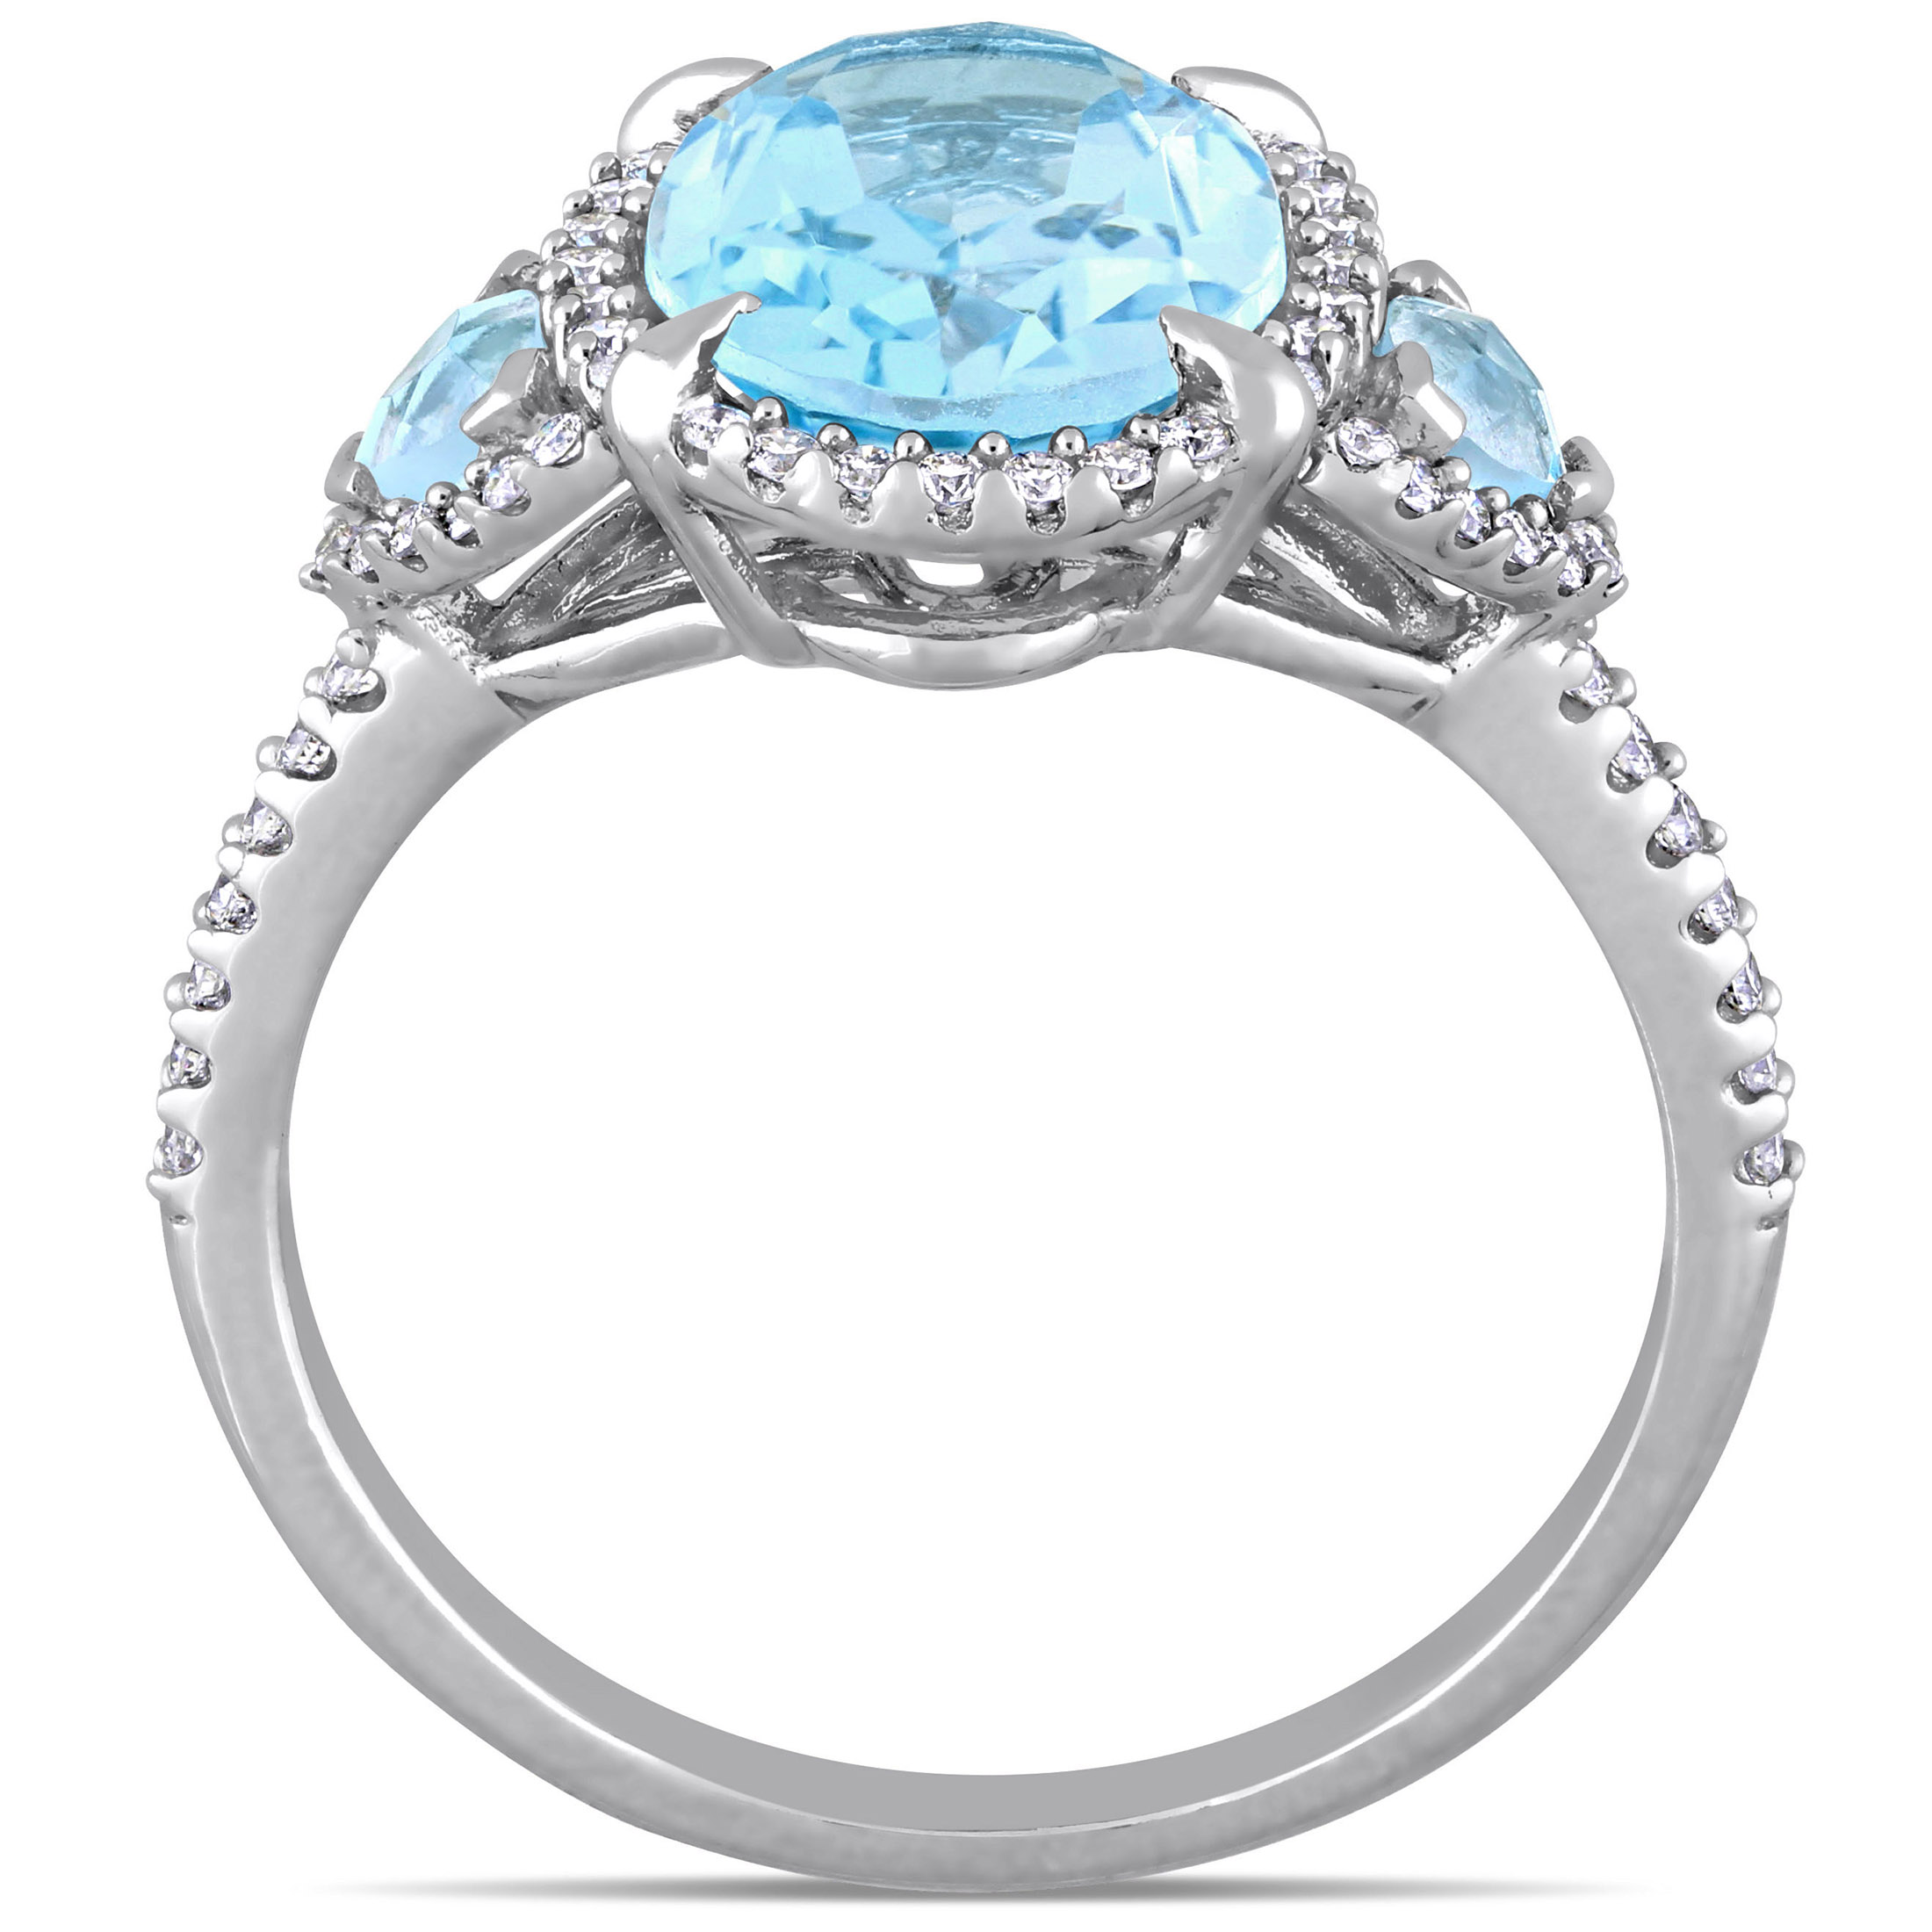 Miabella Women's 4 Carat T.G.W. Oval-Cut and Trilliant-Cut Sky Blue Topaz and 1/4 Carat T.W. Round-Cut Diamond 14kt White Gold Halo Ring - image 4 of 8